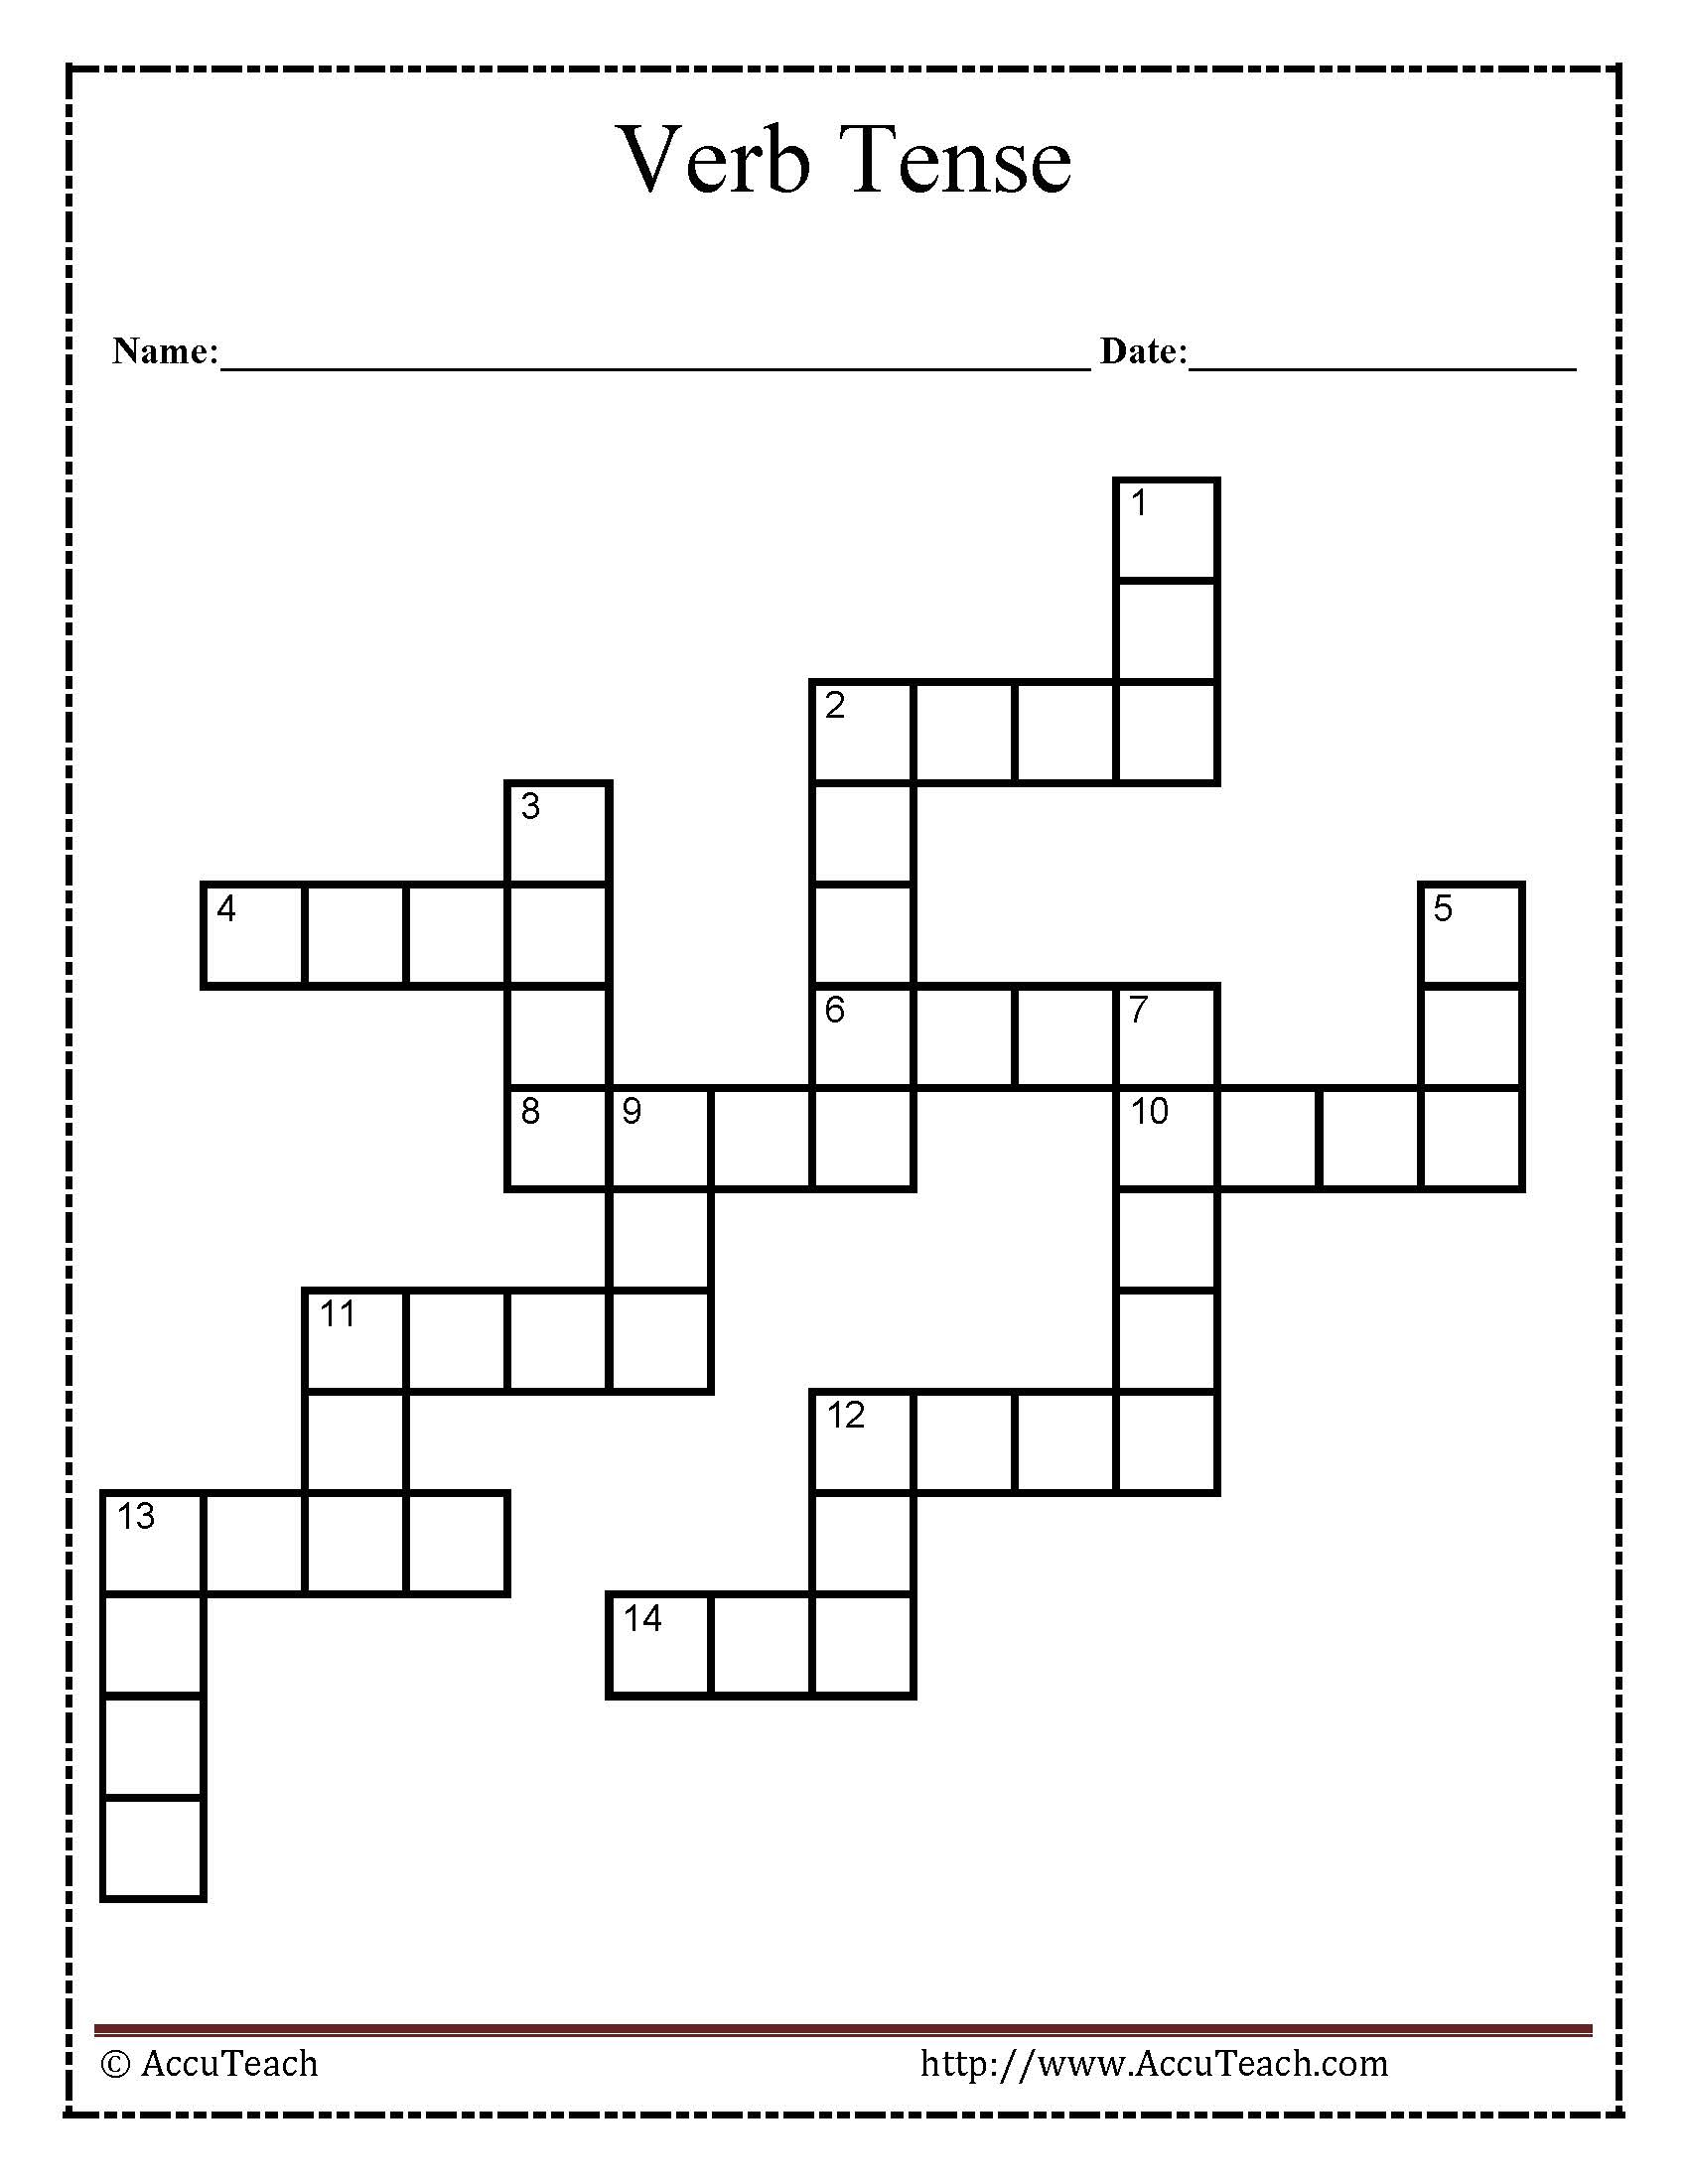 Verb Tense Crossword Puzzle Worksheet - Free Printable Crossword Puzzles For 6Th Graders